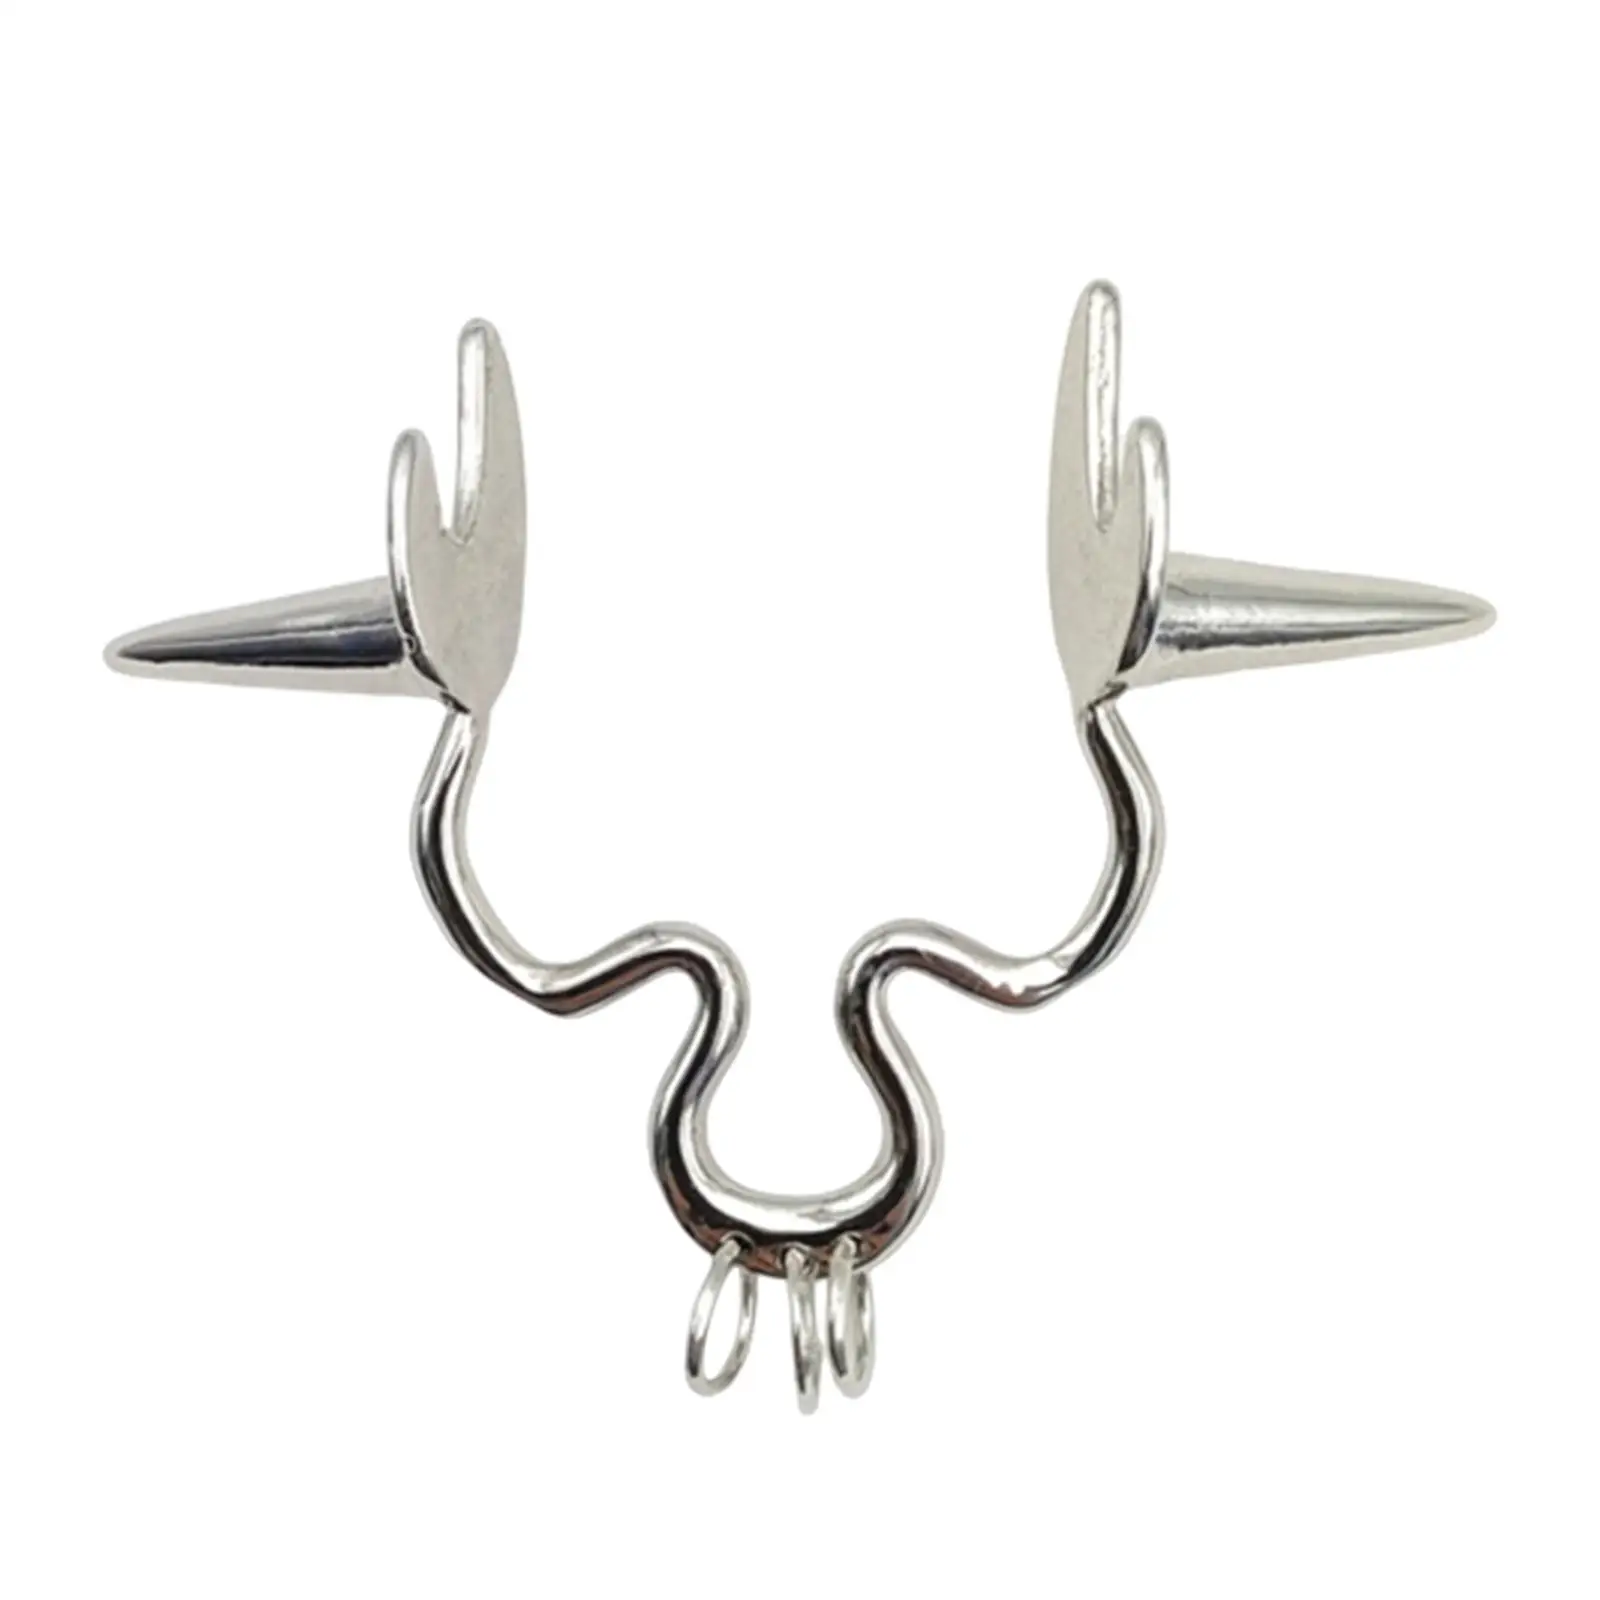 Nose Ring Body Jewelry Fashion Nose Cuffs Rings Cosplay Nose Piercings Jewelry Creative for Stage Gift Holiday Makeup Women Men